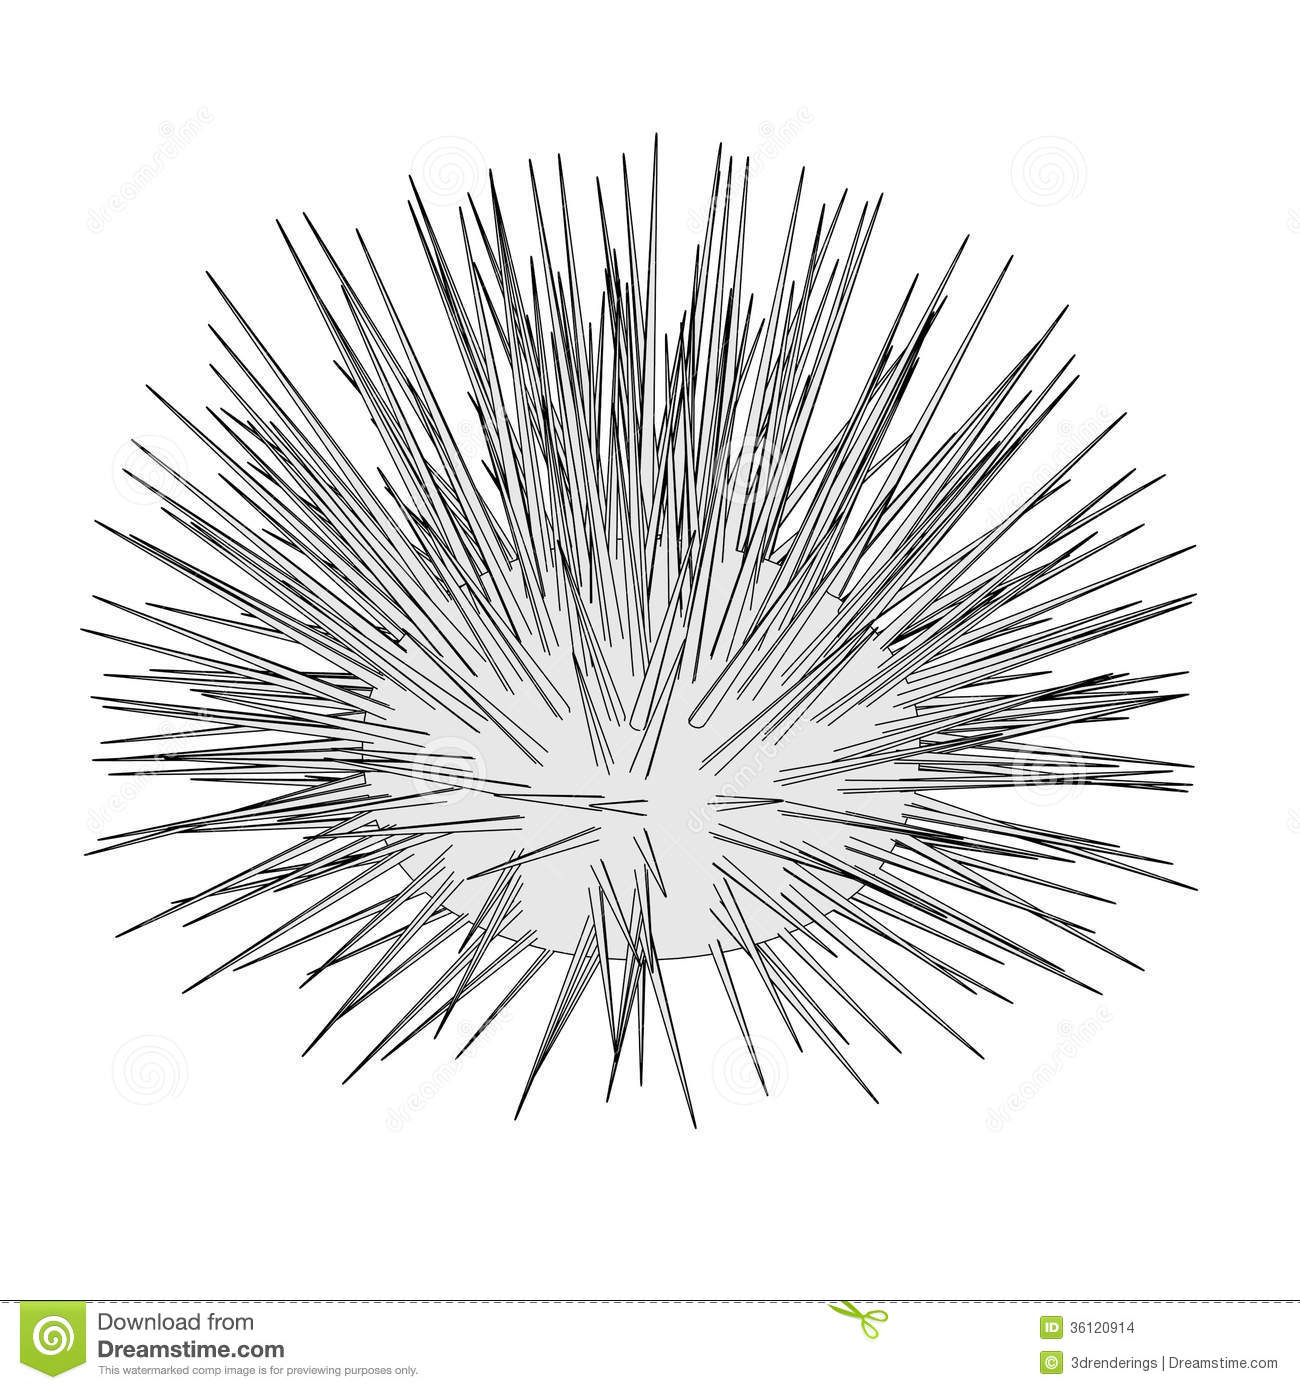 Image Of Sea Urchin Stock Images   Image  36120914